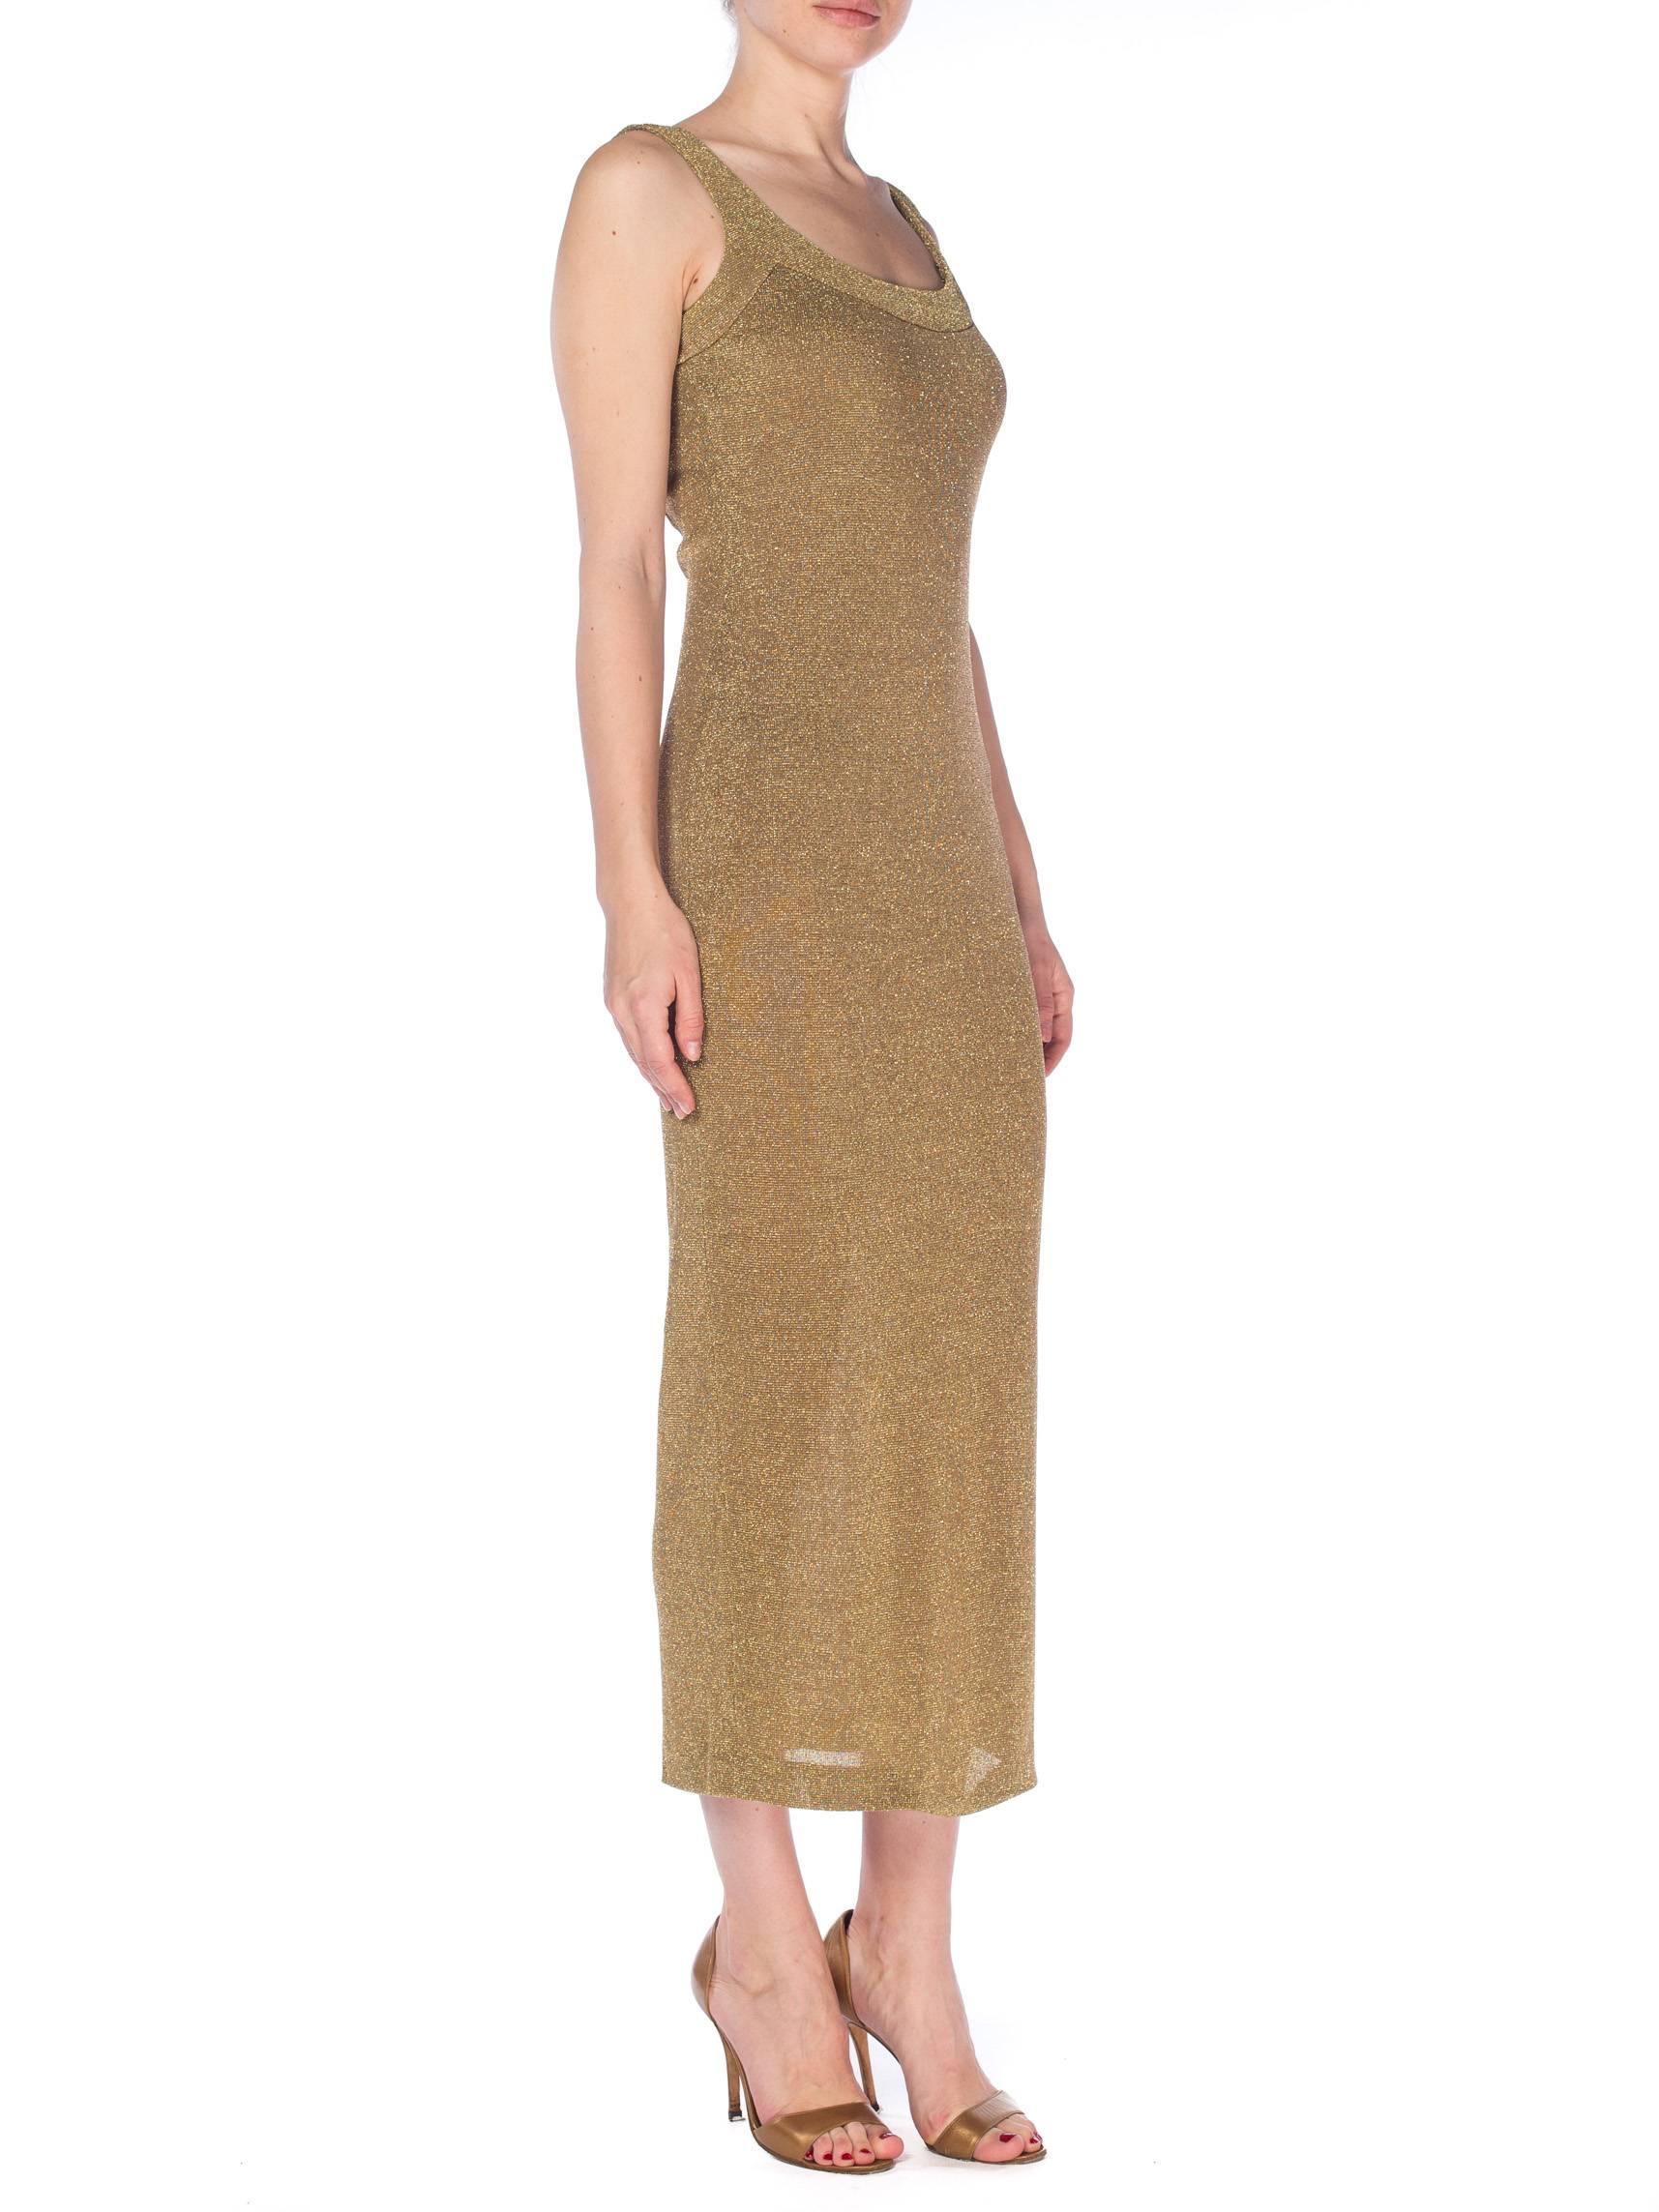 Brown Bruce Oldfield Gold Knit Bodycon Sparkle Disco 90s Dress